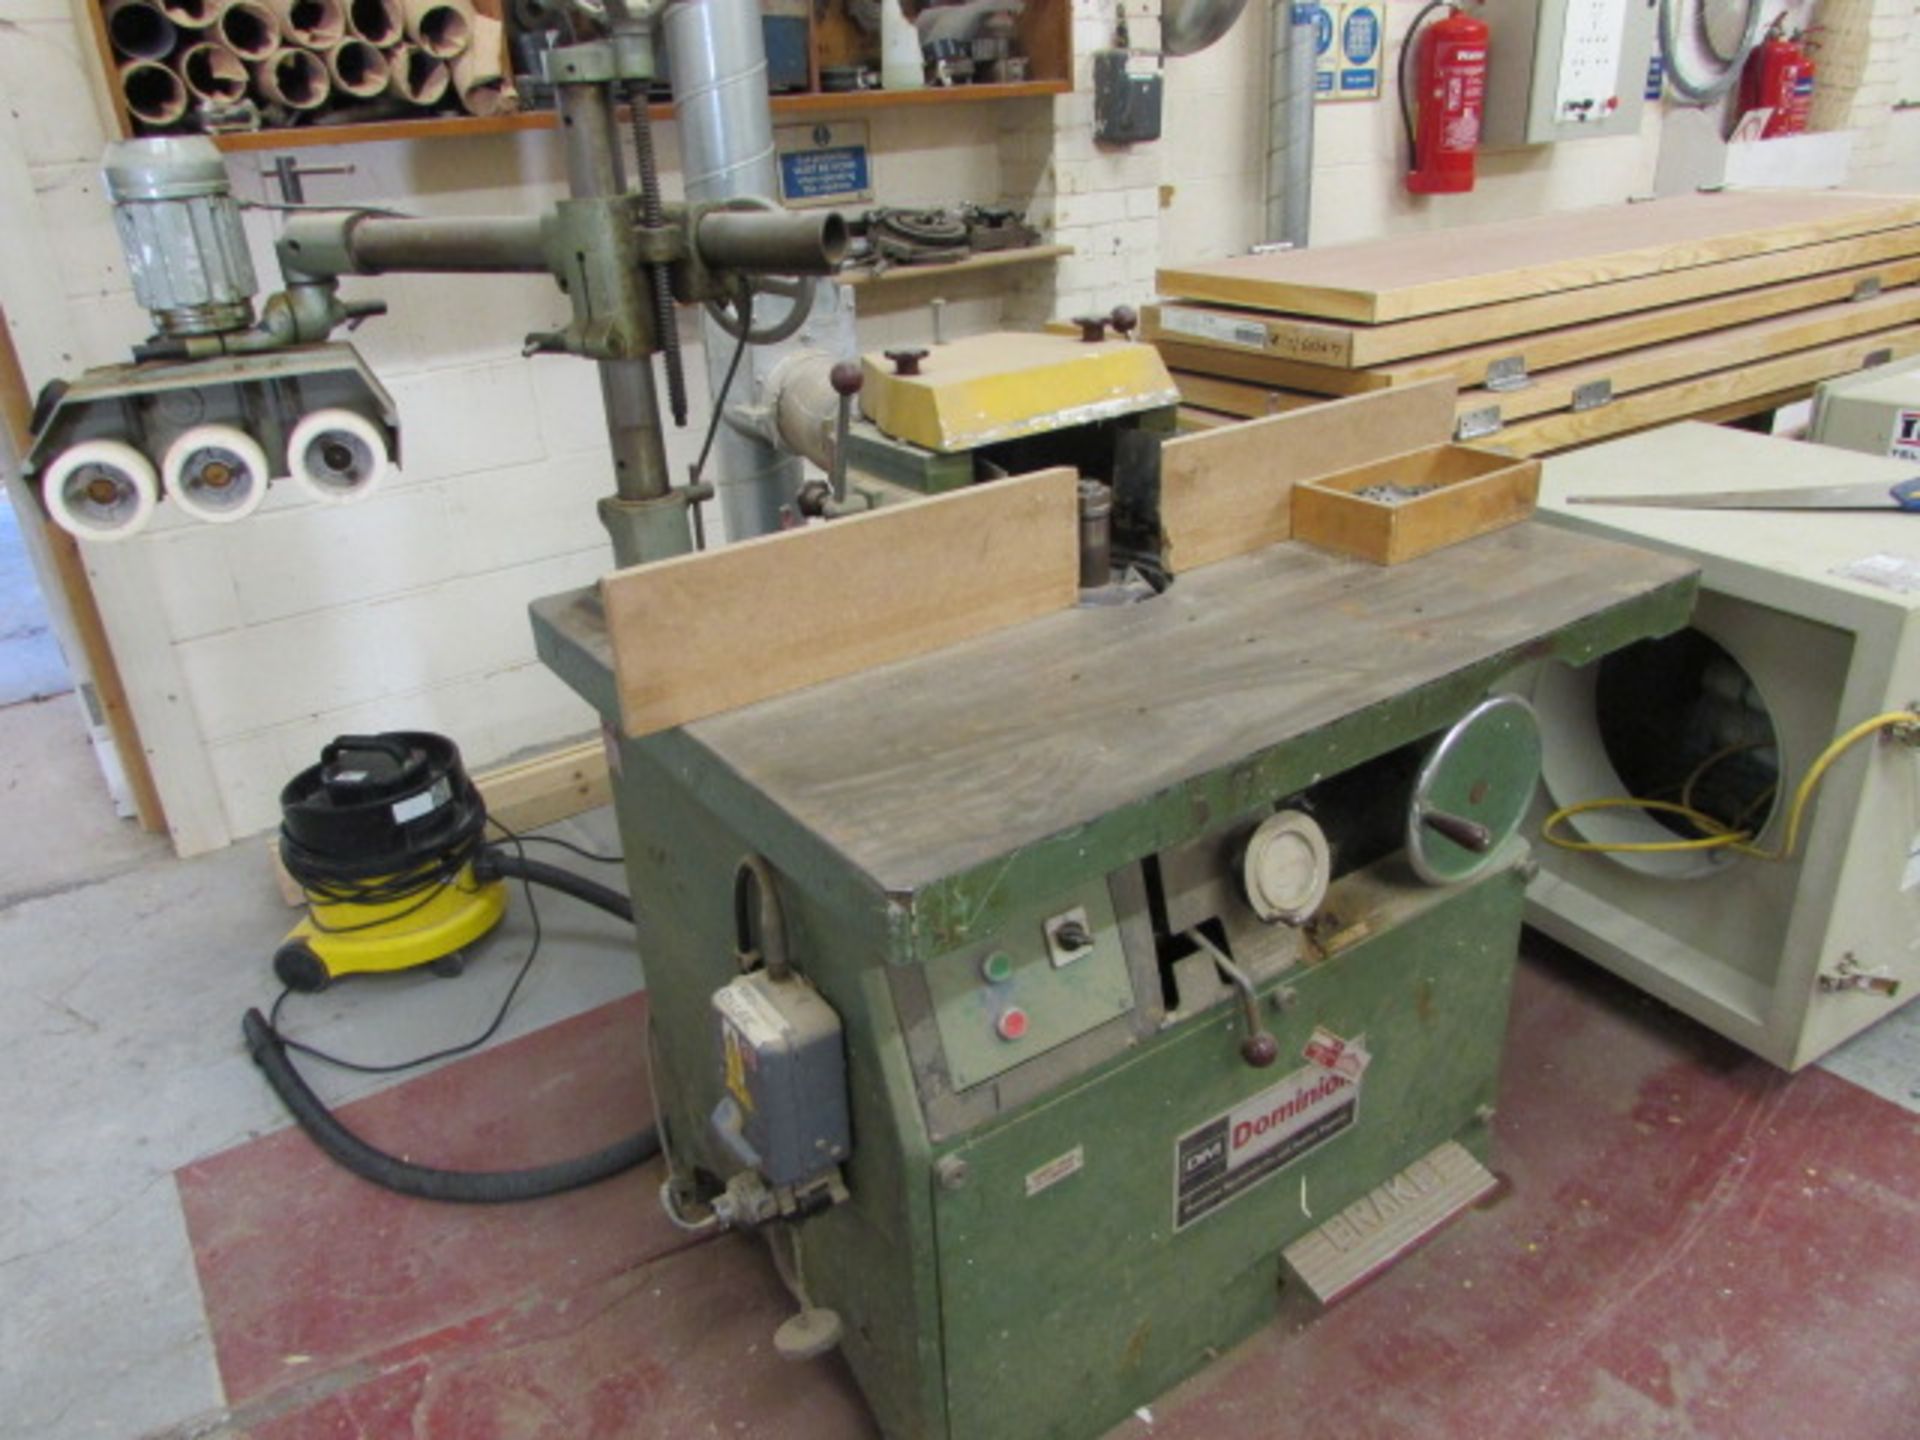 Dominion spindle moulder s/n B503733 with a Bursgreen 3 wheel BLG-8 powerfeed